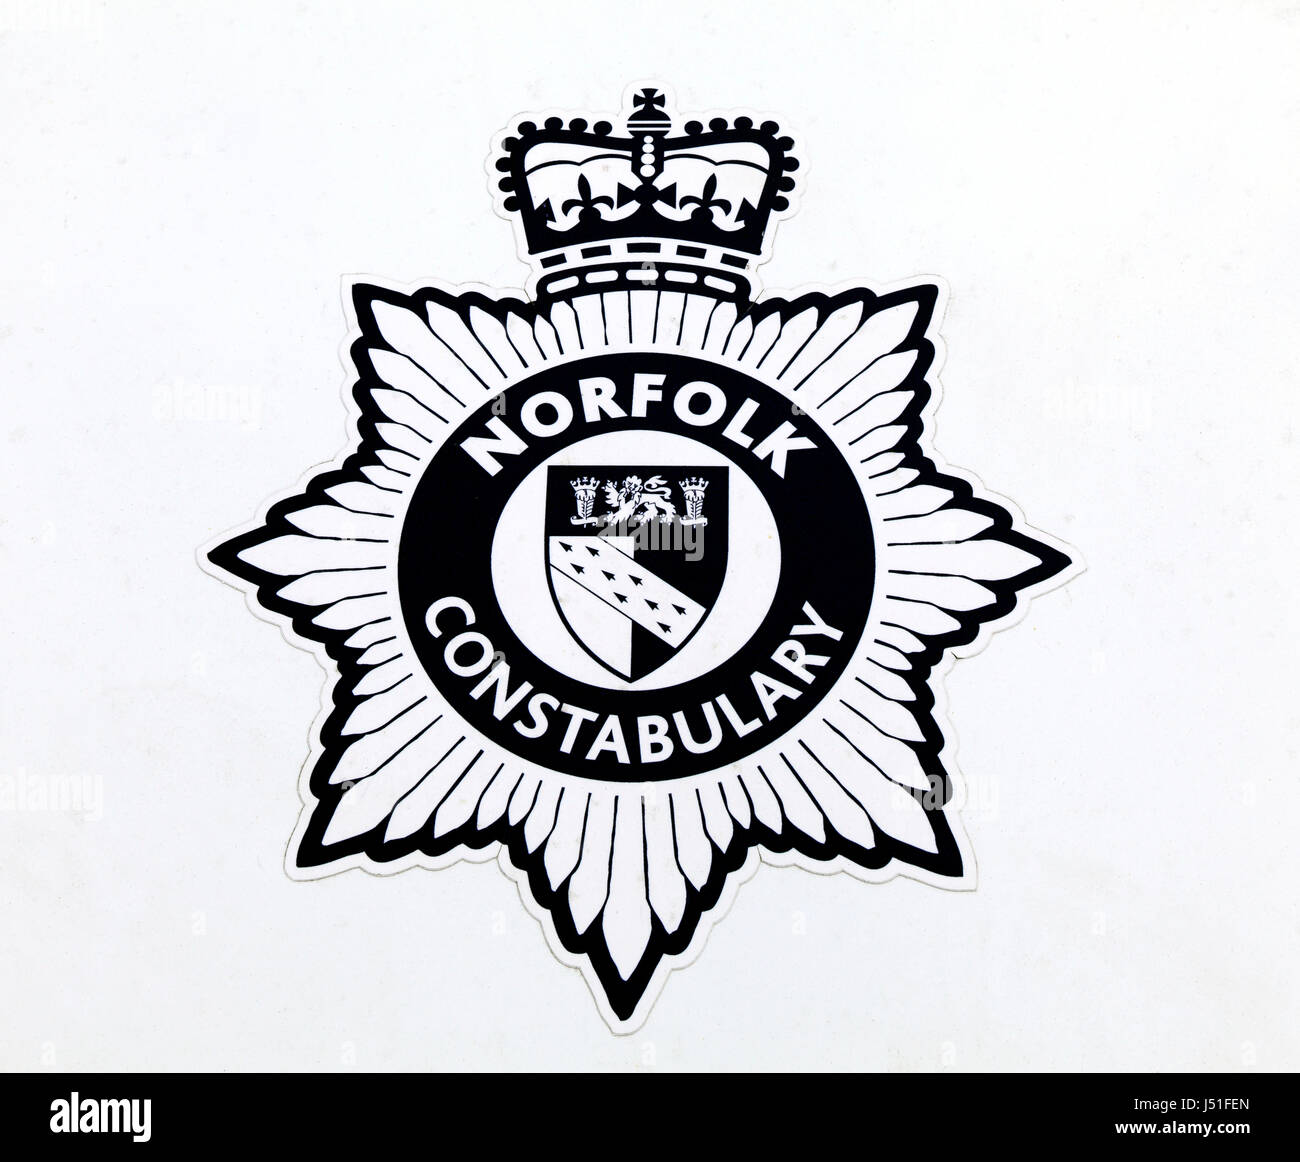 Norfolk Constabulary, logo, police car insignia, badge, English county police force, England UK, police forces Stock Photo